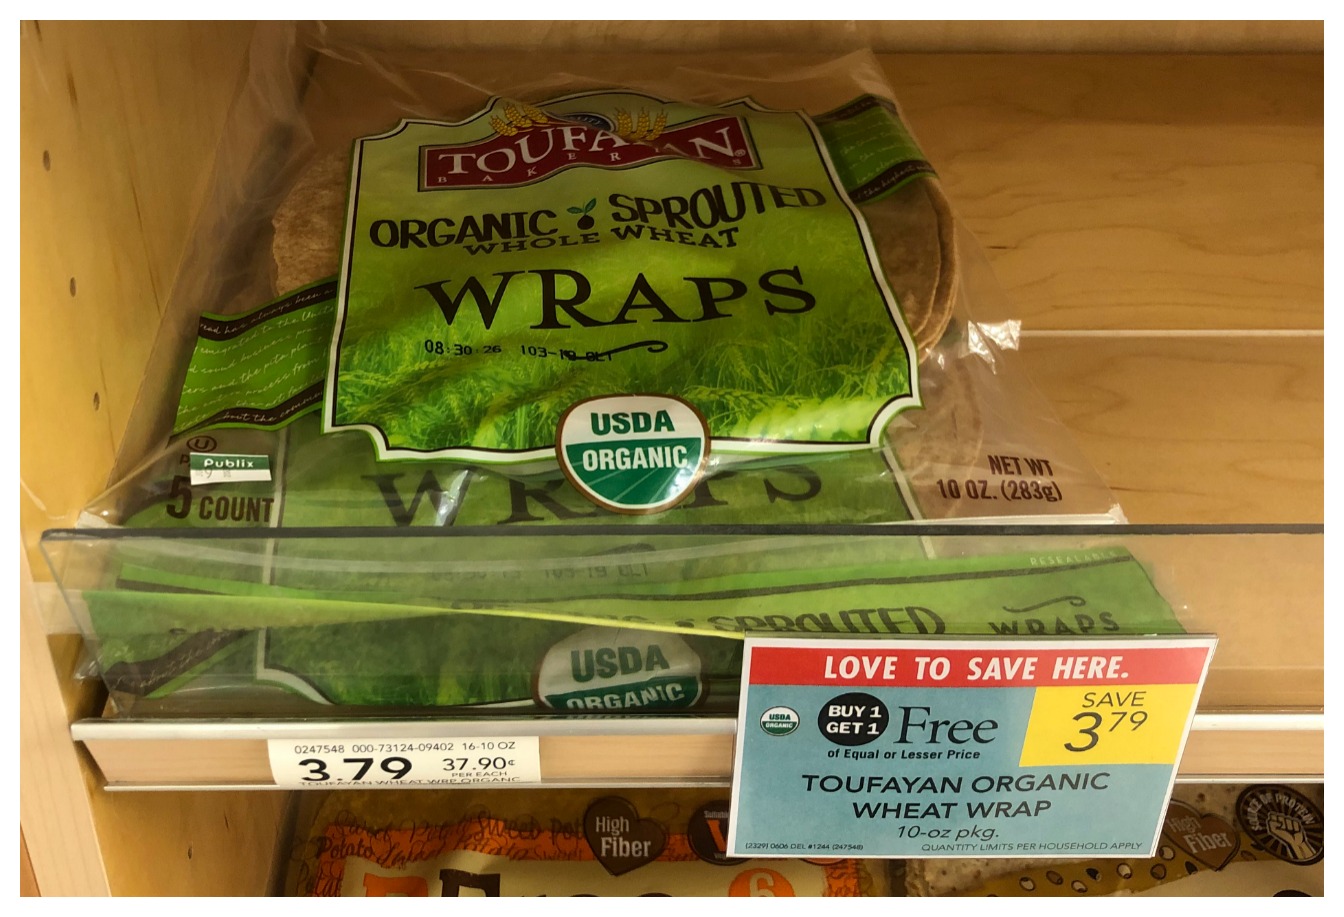 Stock Up On Toufayan Wraps -  BOGO Sale This Week At Publix on I Heart Publix